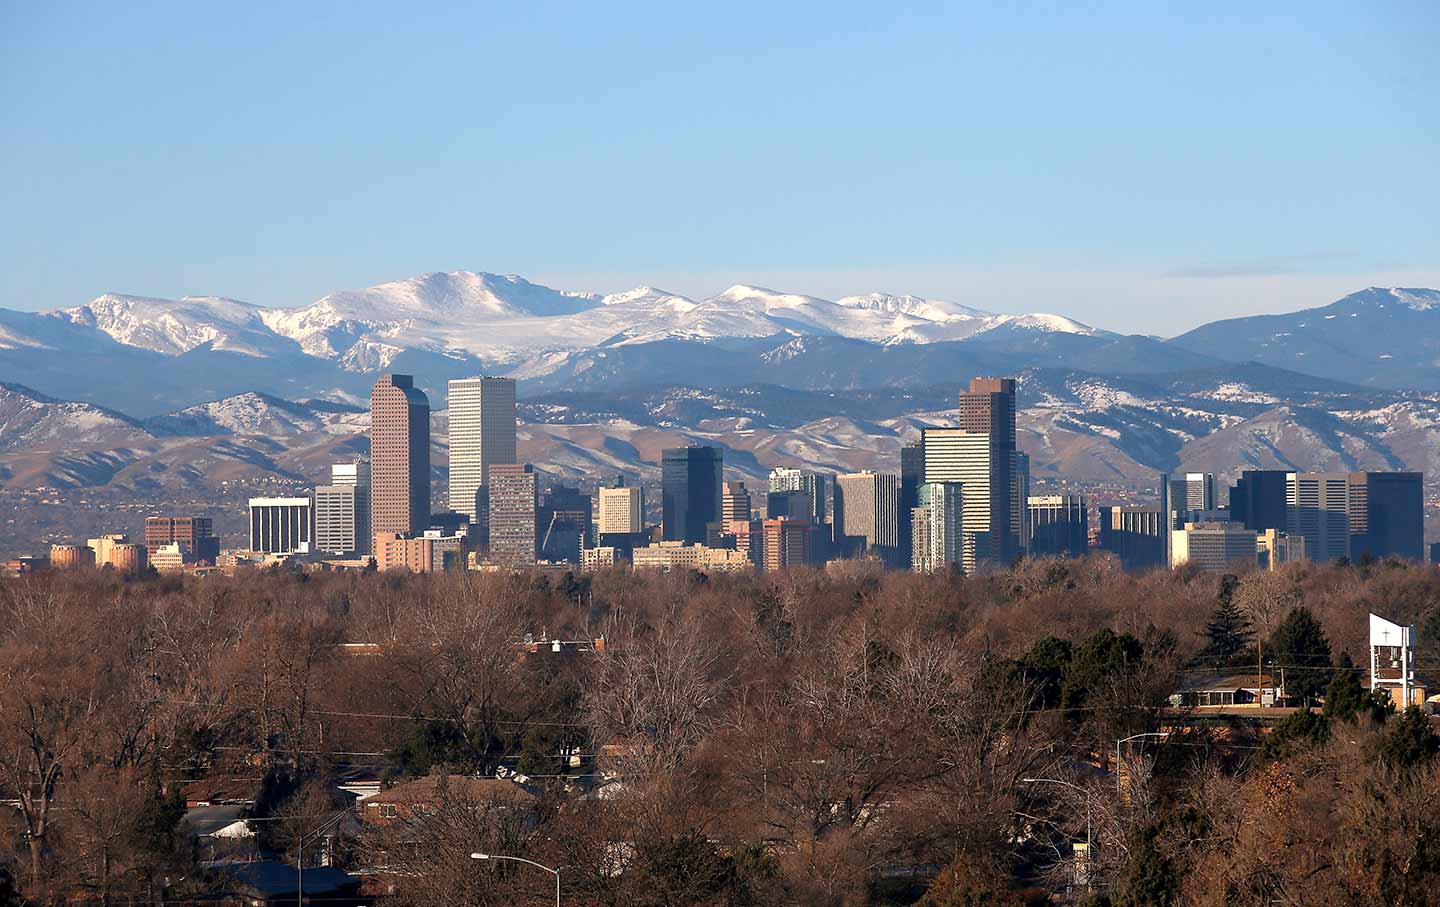 The city skyline of Denver, Colorado, with the Rocky Mountains in the dista...